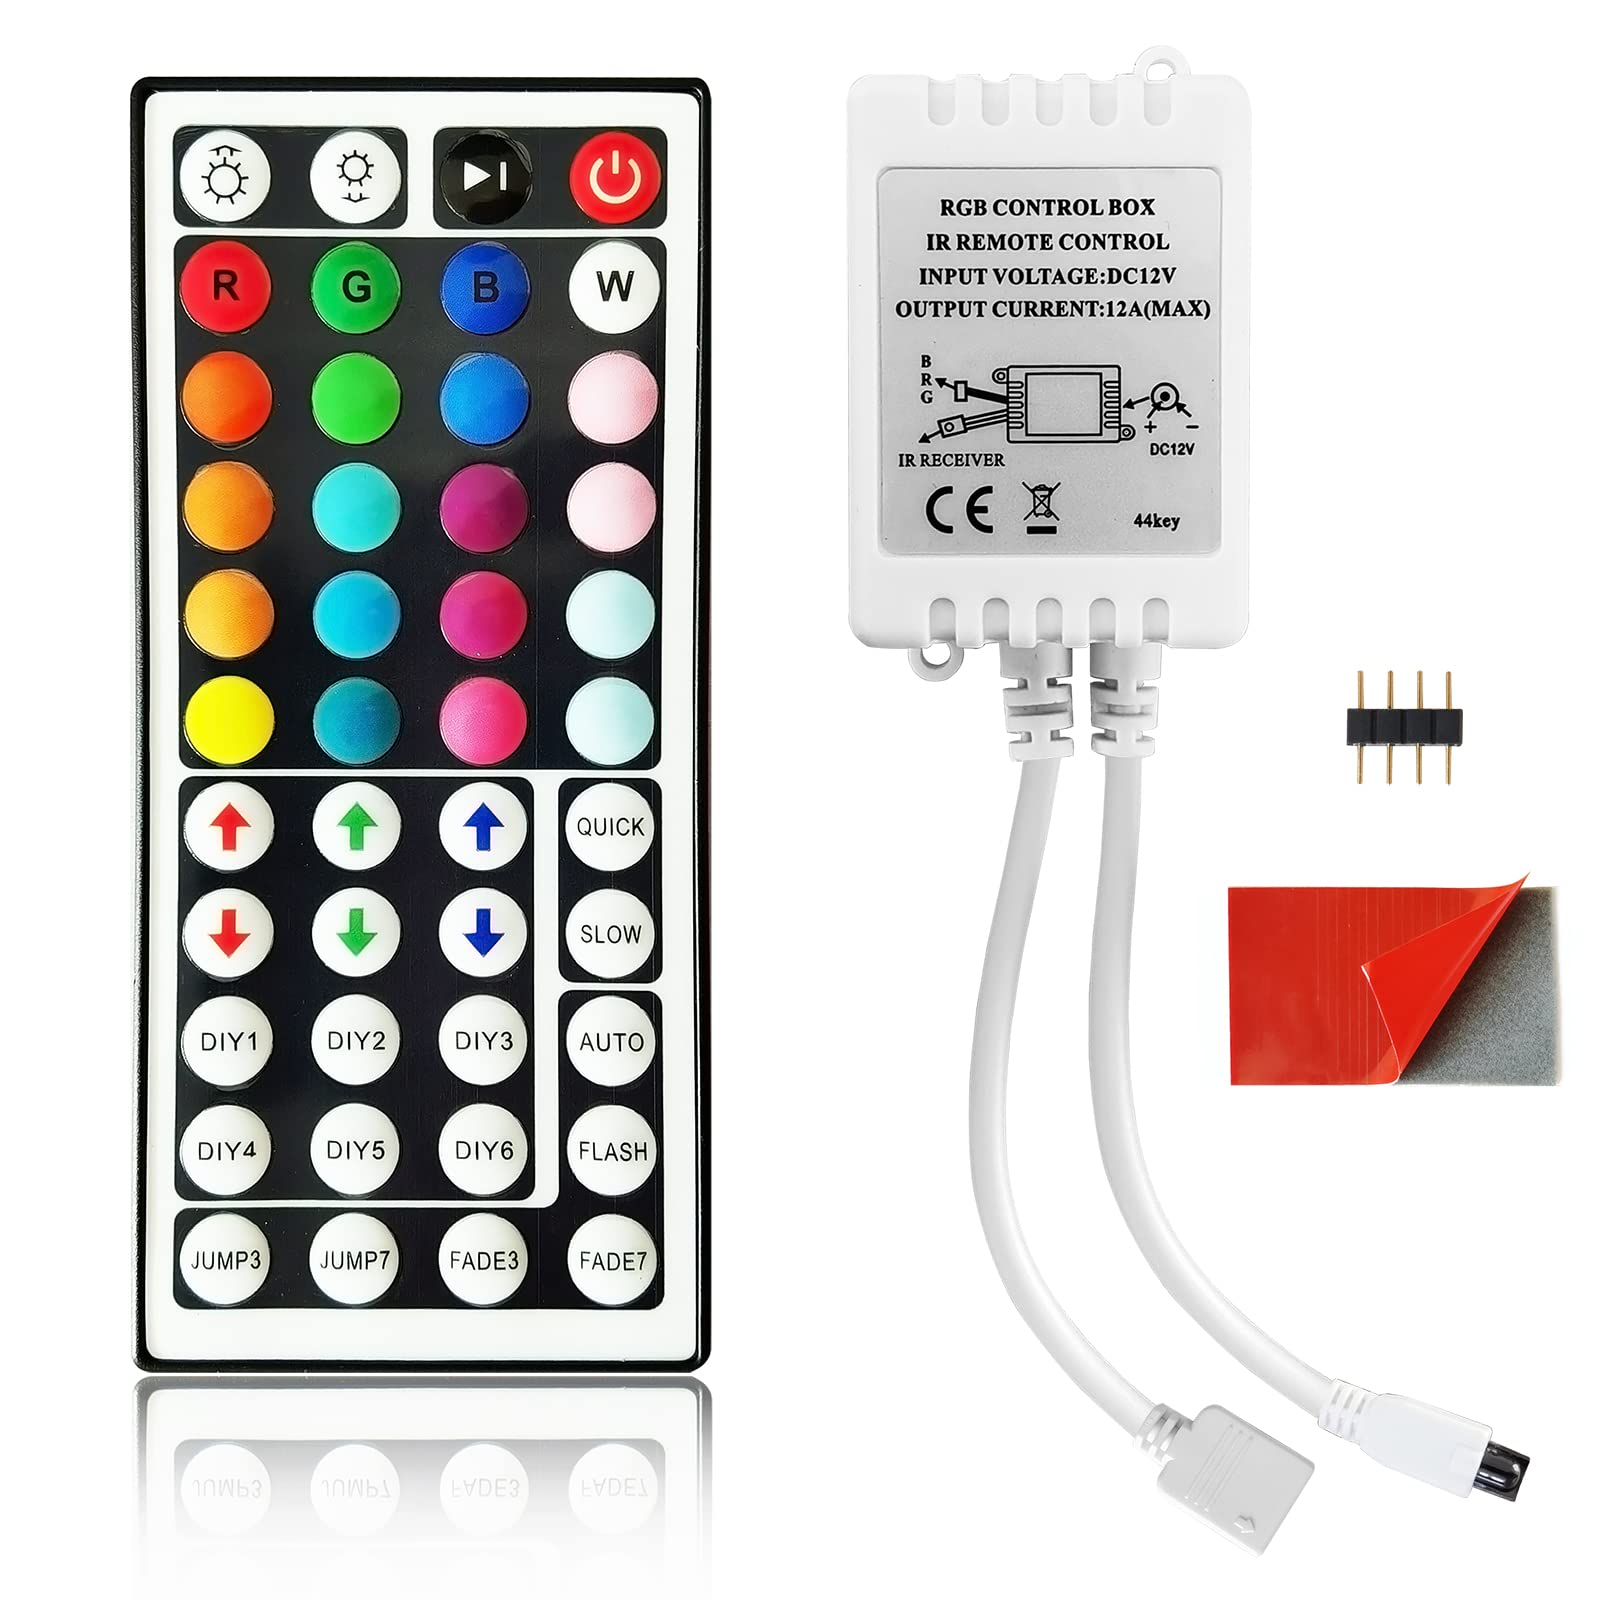 LED Lights Remote Control, ZABY 44 Keys Wireless IR Remote LED Controller Box with Receiver for RGB 5050 3528 LED Strip Lights